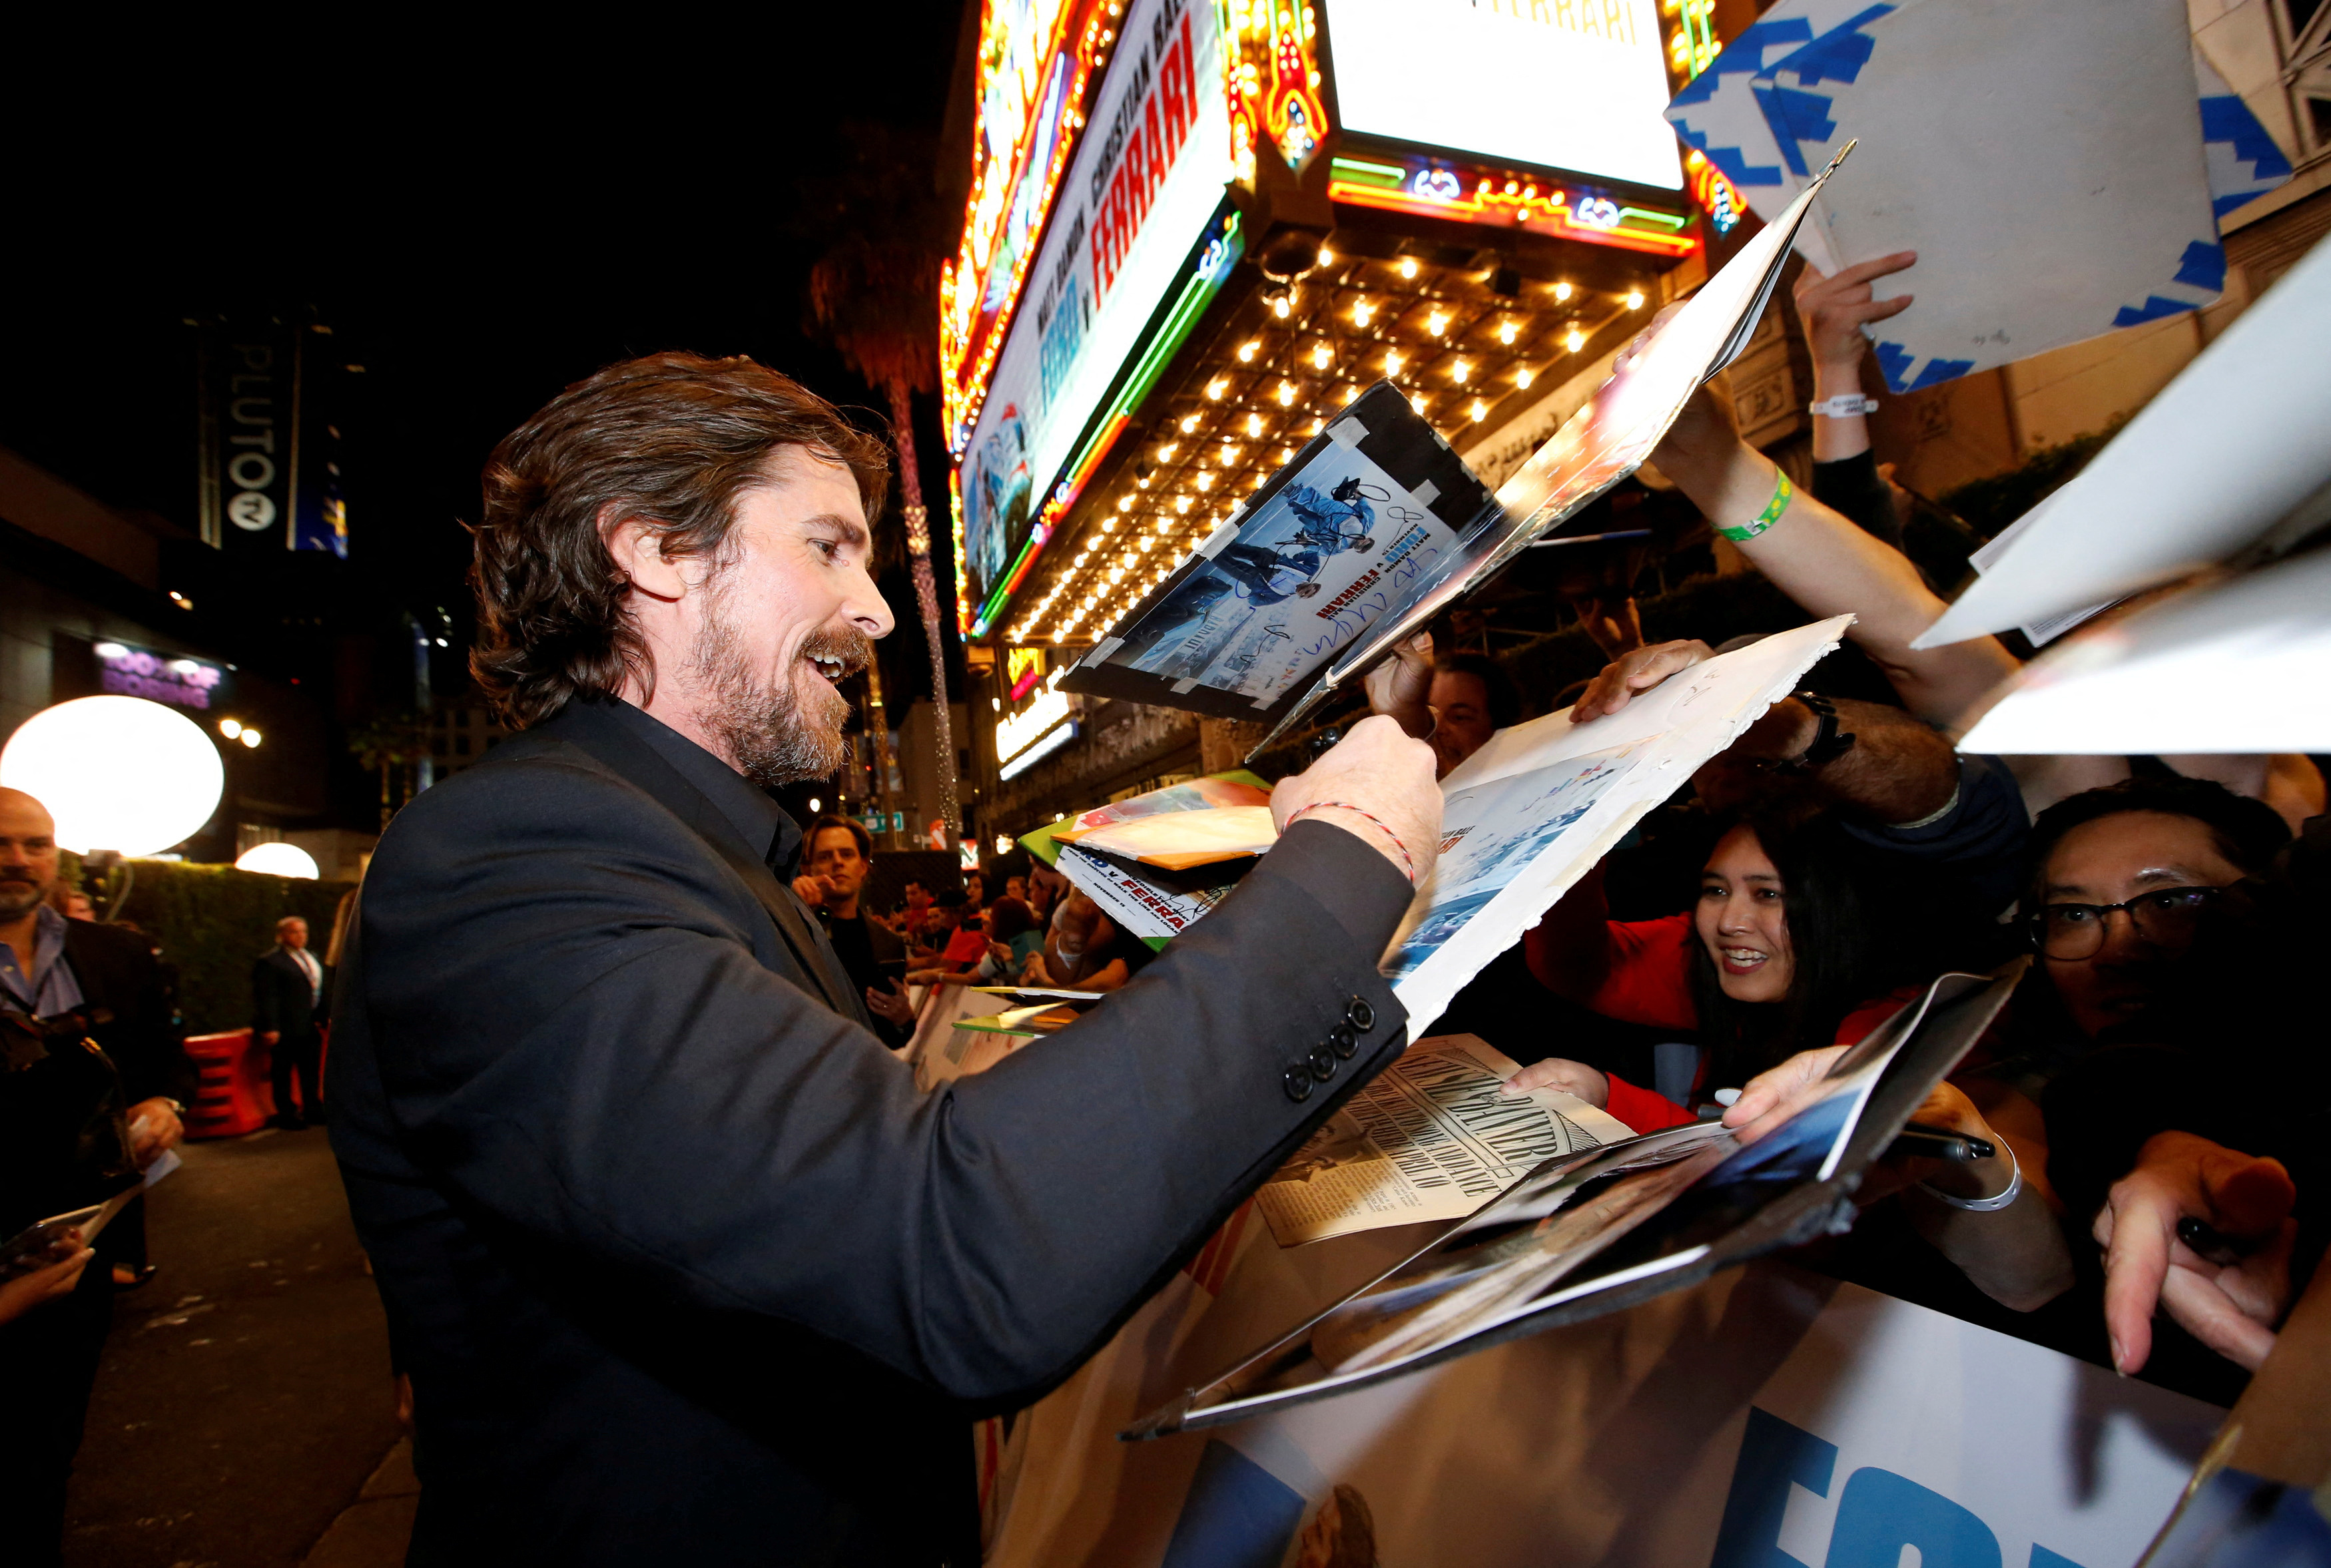 Cast member Bale signs autographs at a special screening for the movie 